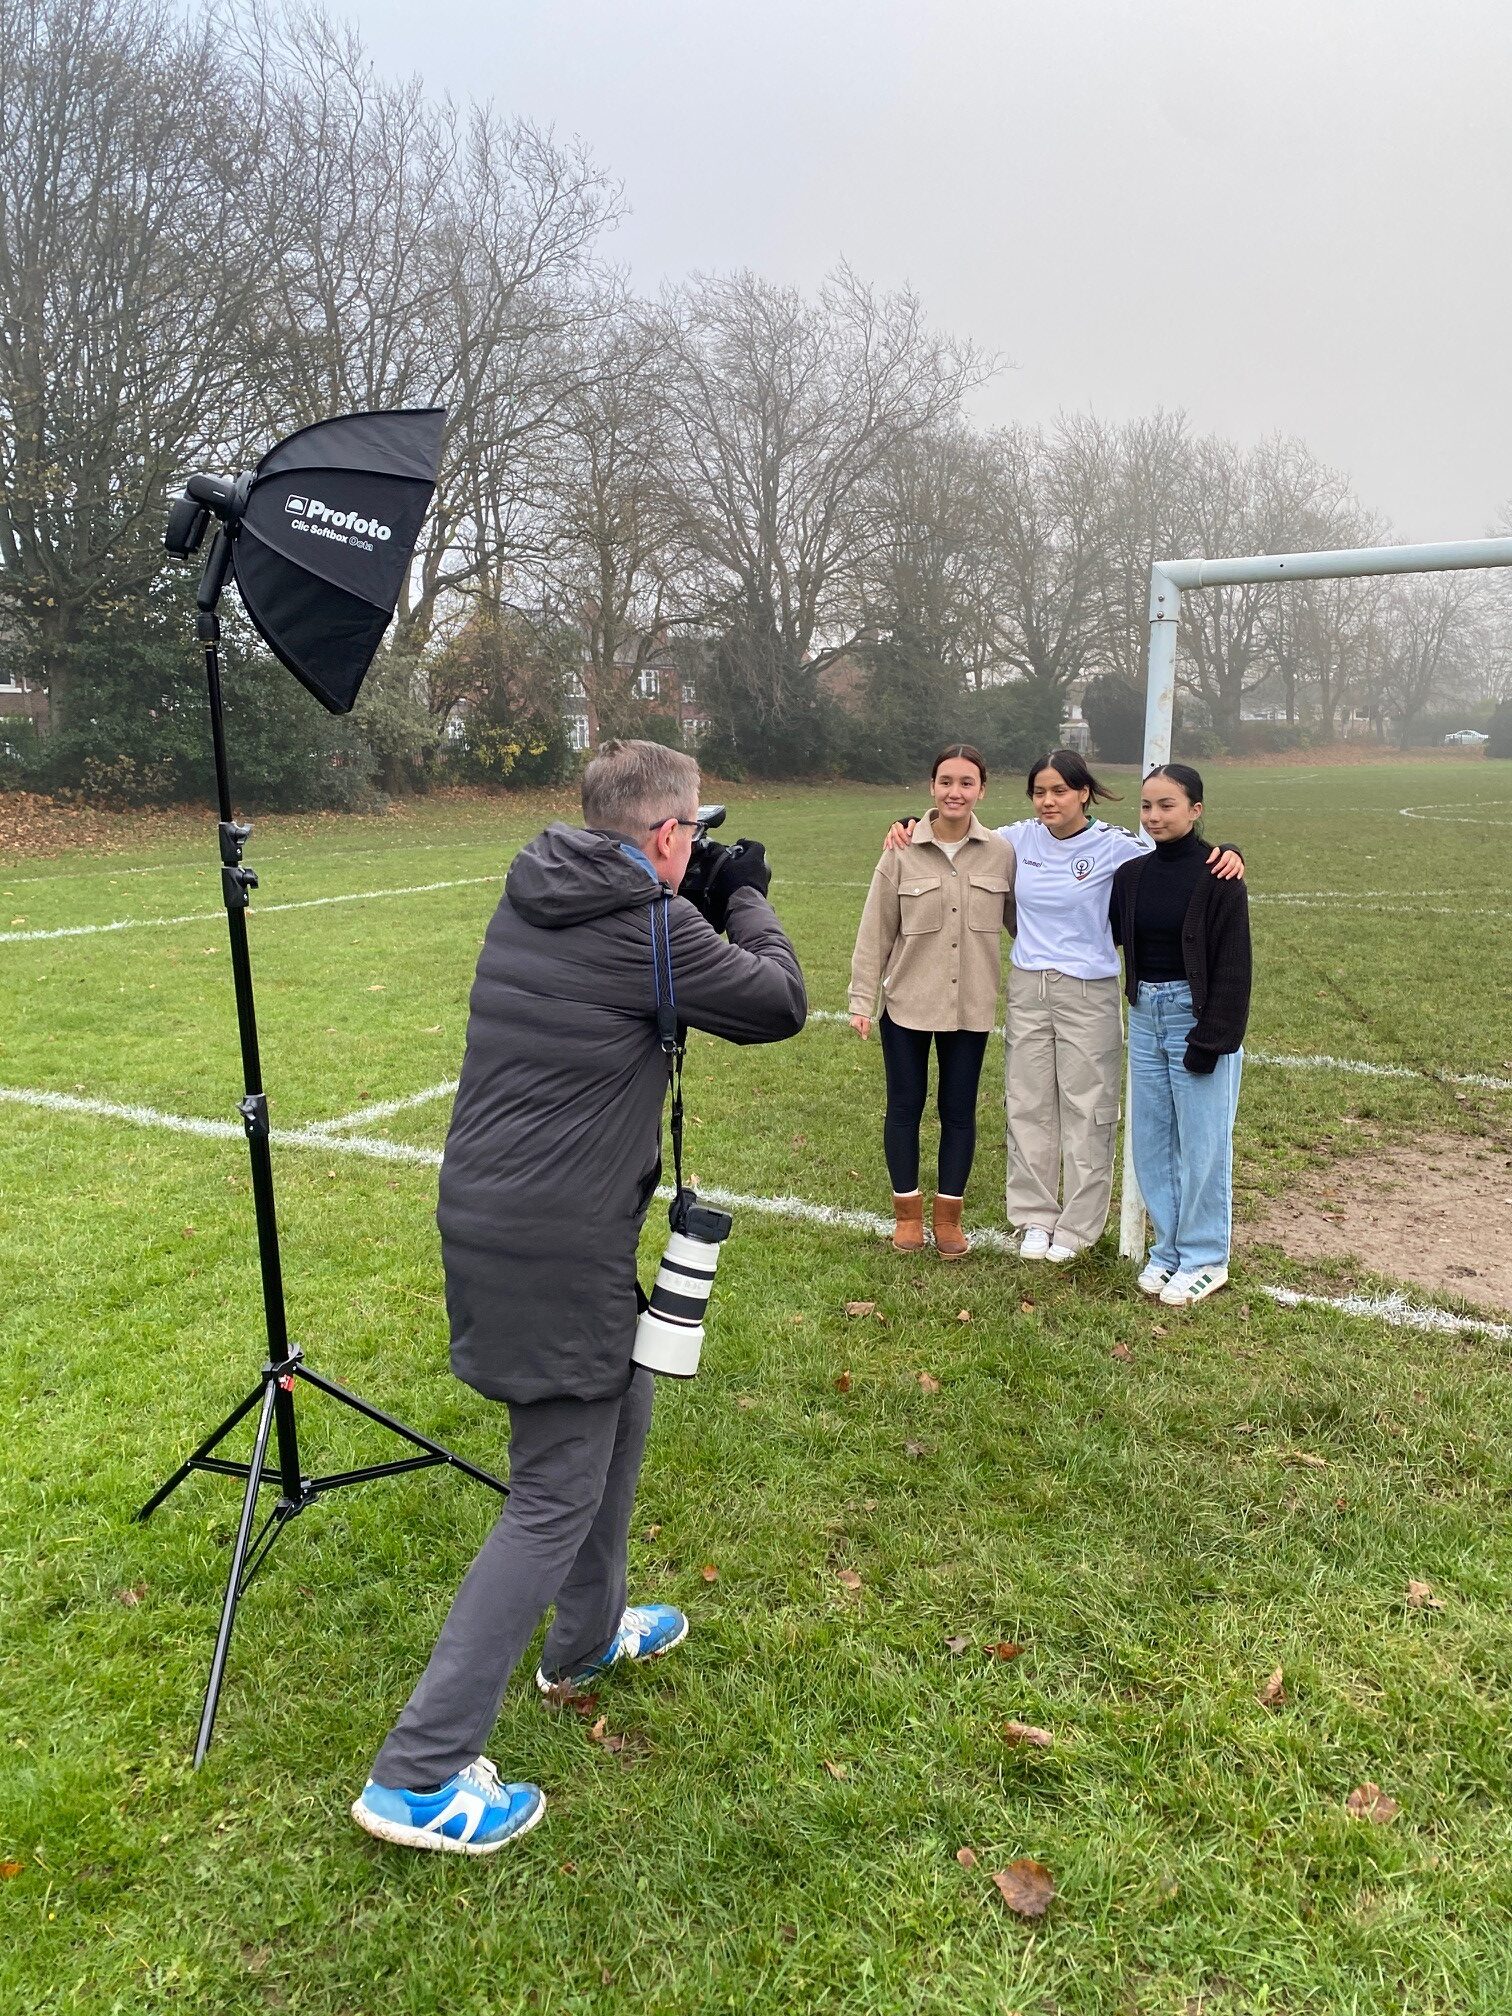 Narges, Najma and Elaha, being photographed by Chris.